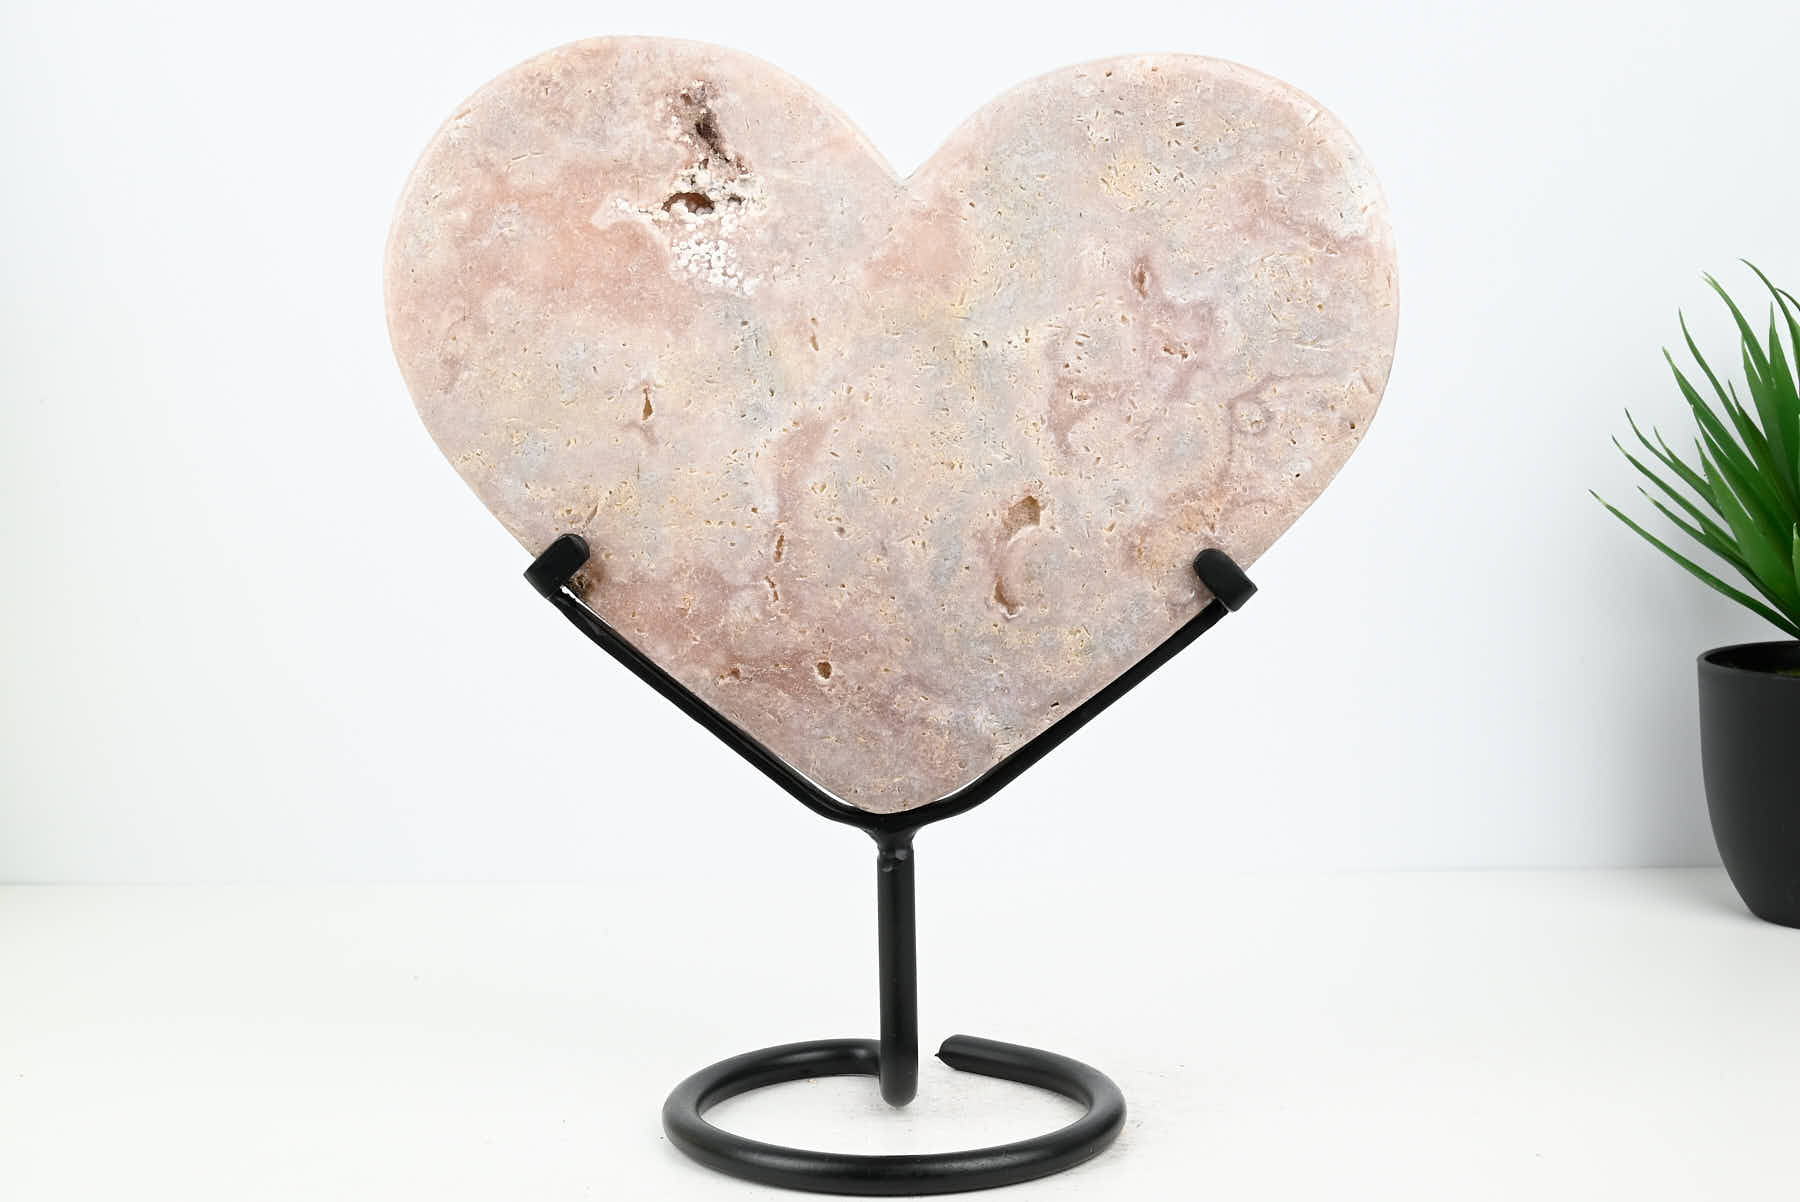 Extra Quality Pink Amethyst Heart - 2.56kg, 27cm high - #HTPINK-34019